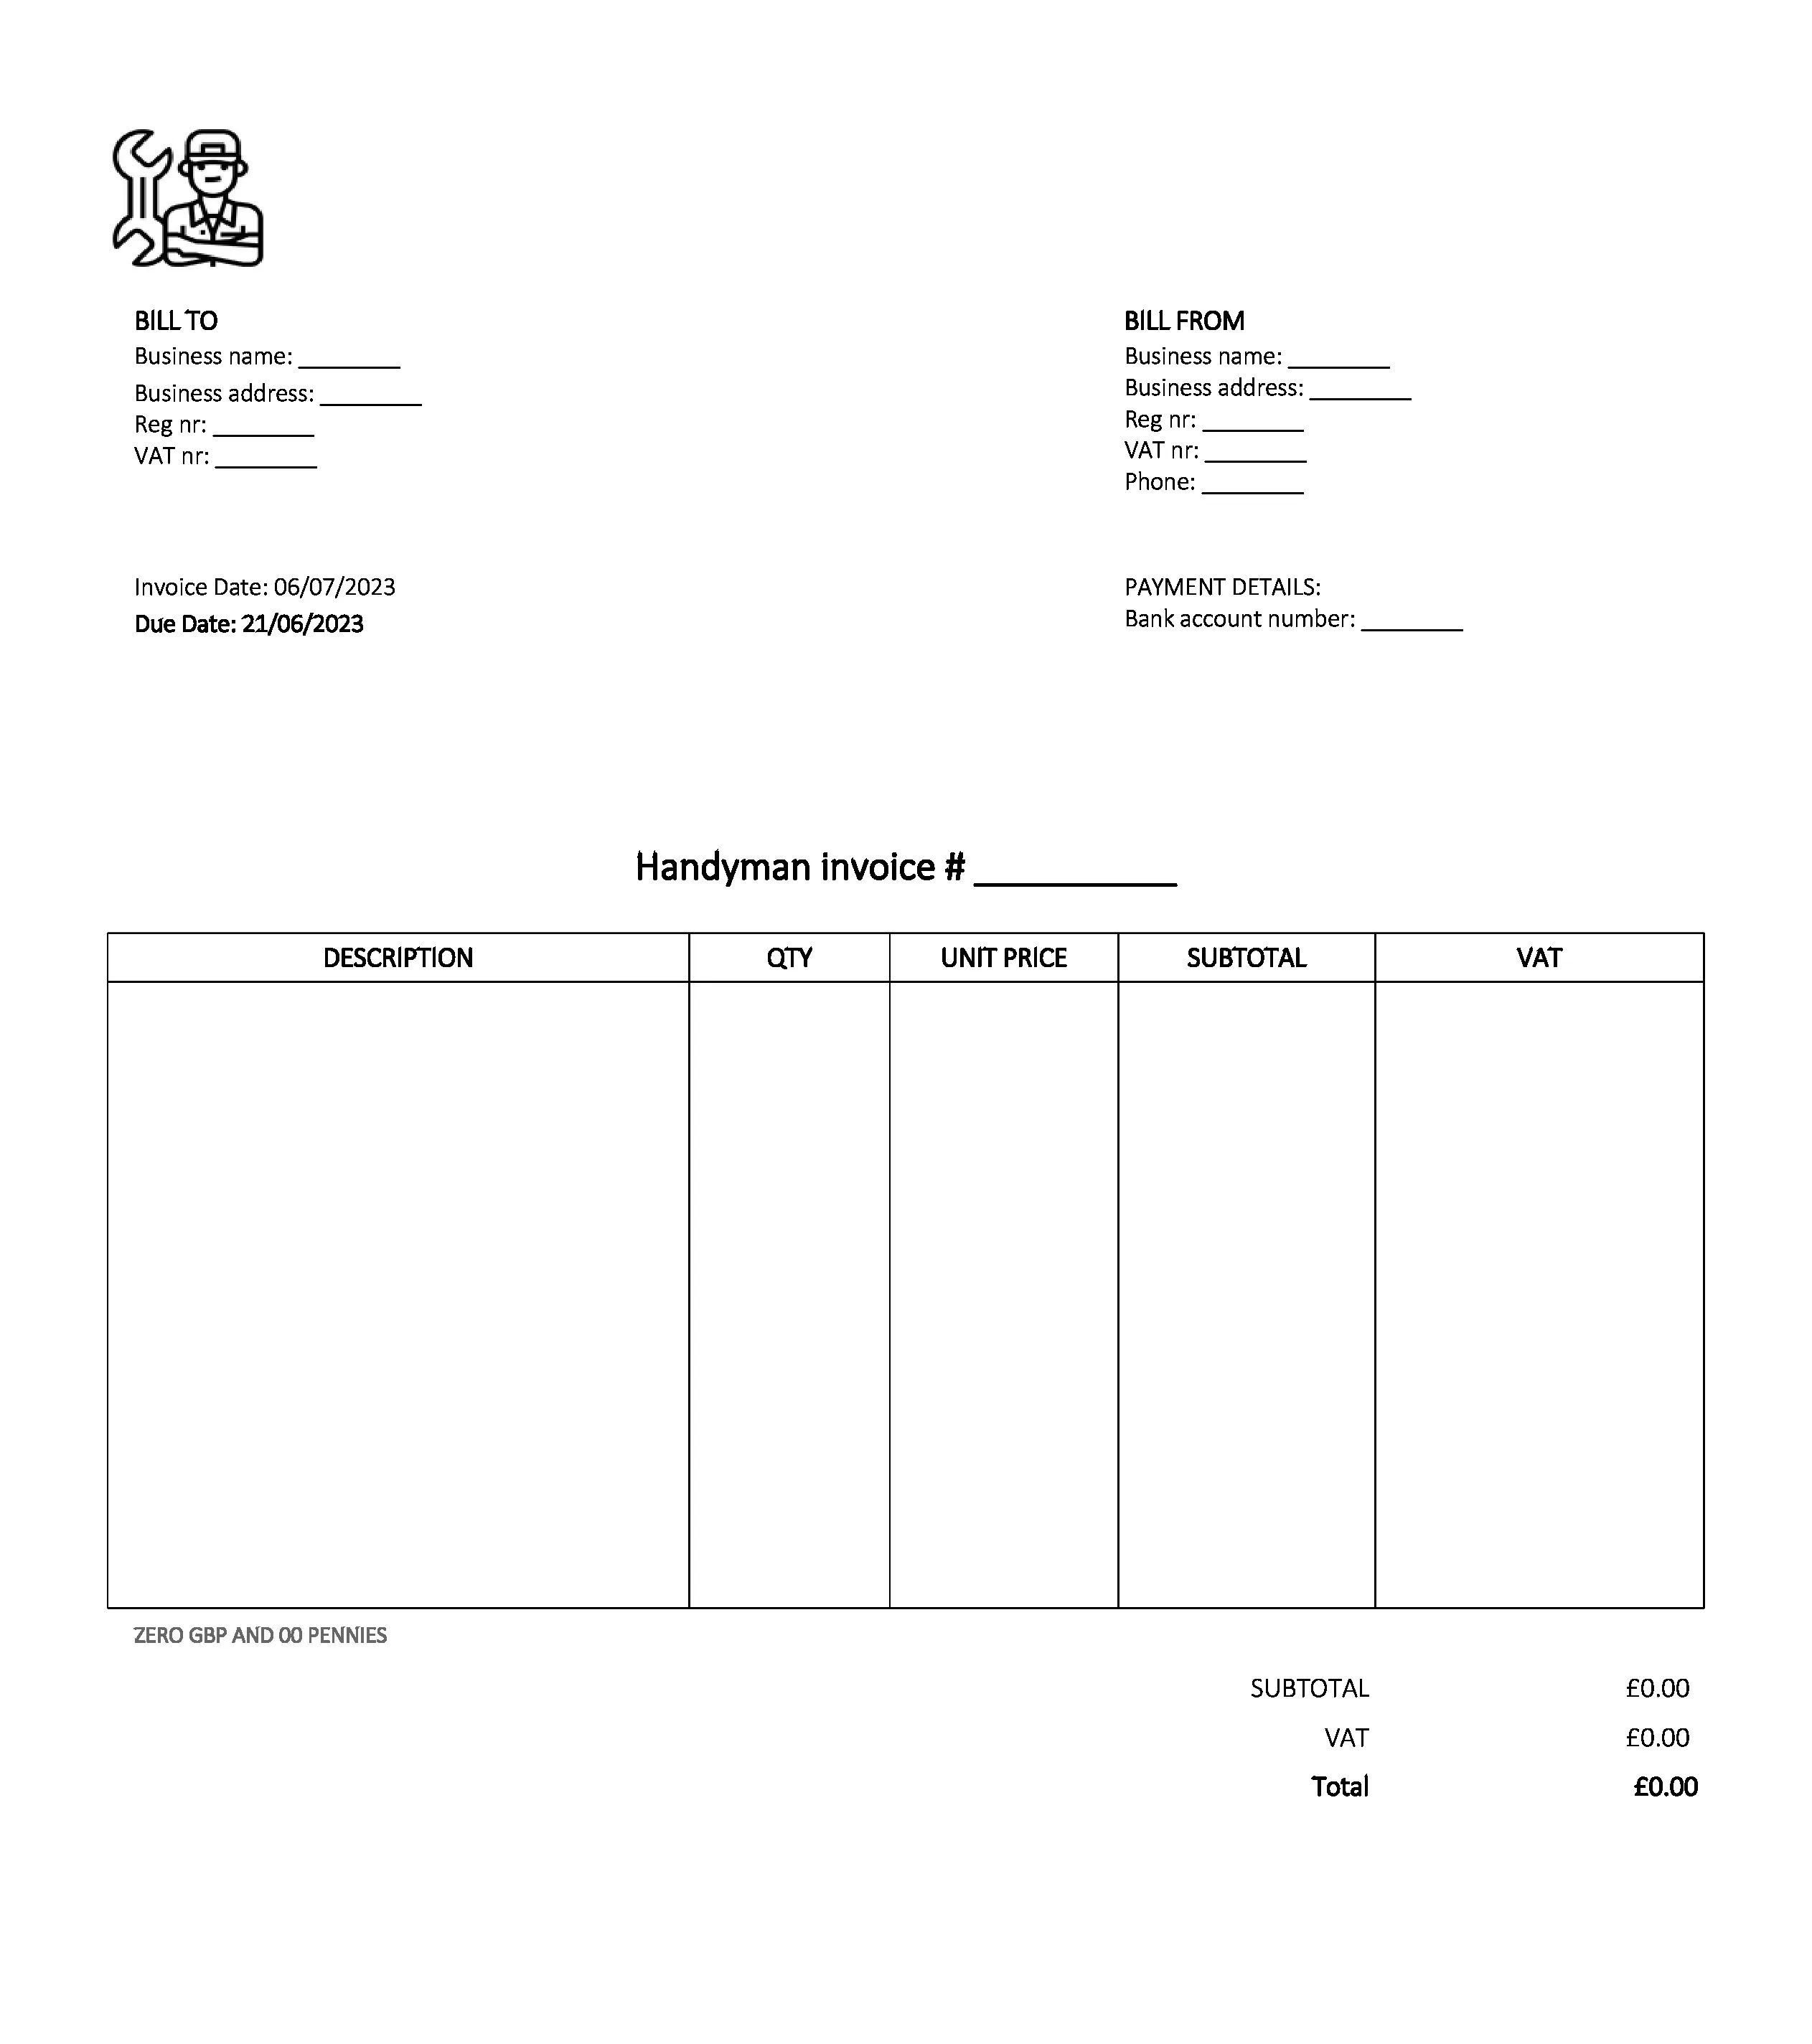 email deliverable handyman invoice template UK Excel / Google sheets